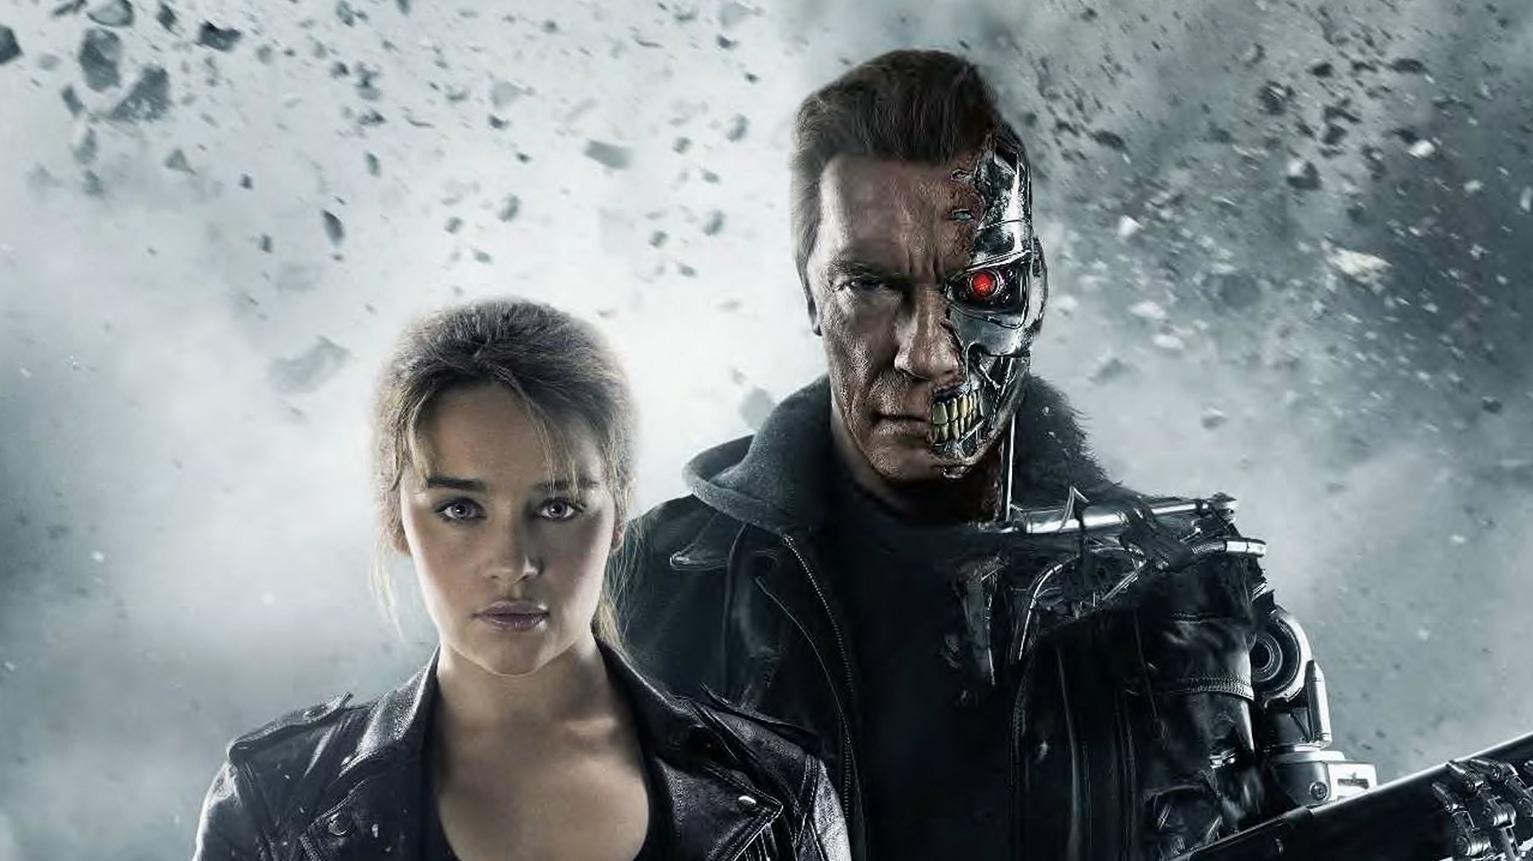 Are we heading for a Terminator -style future where AI “super-intelligence” turns against mankind?